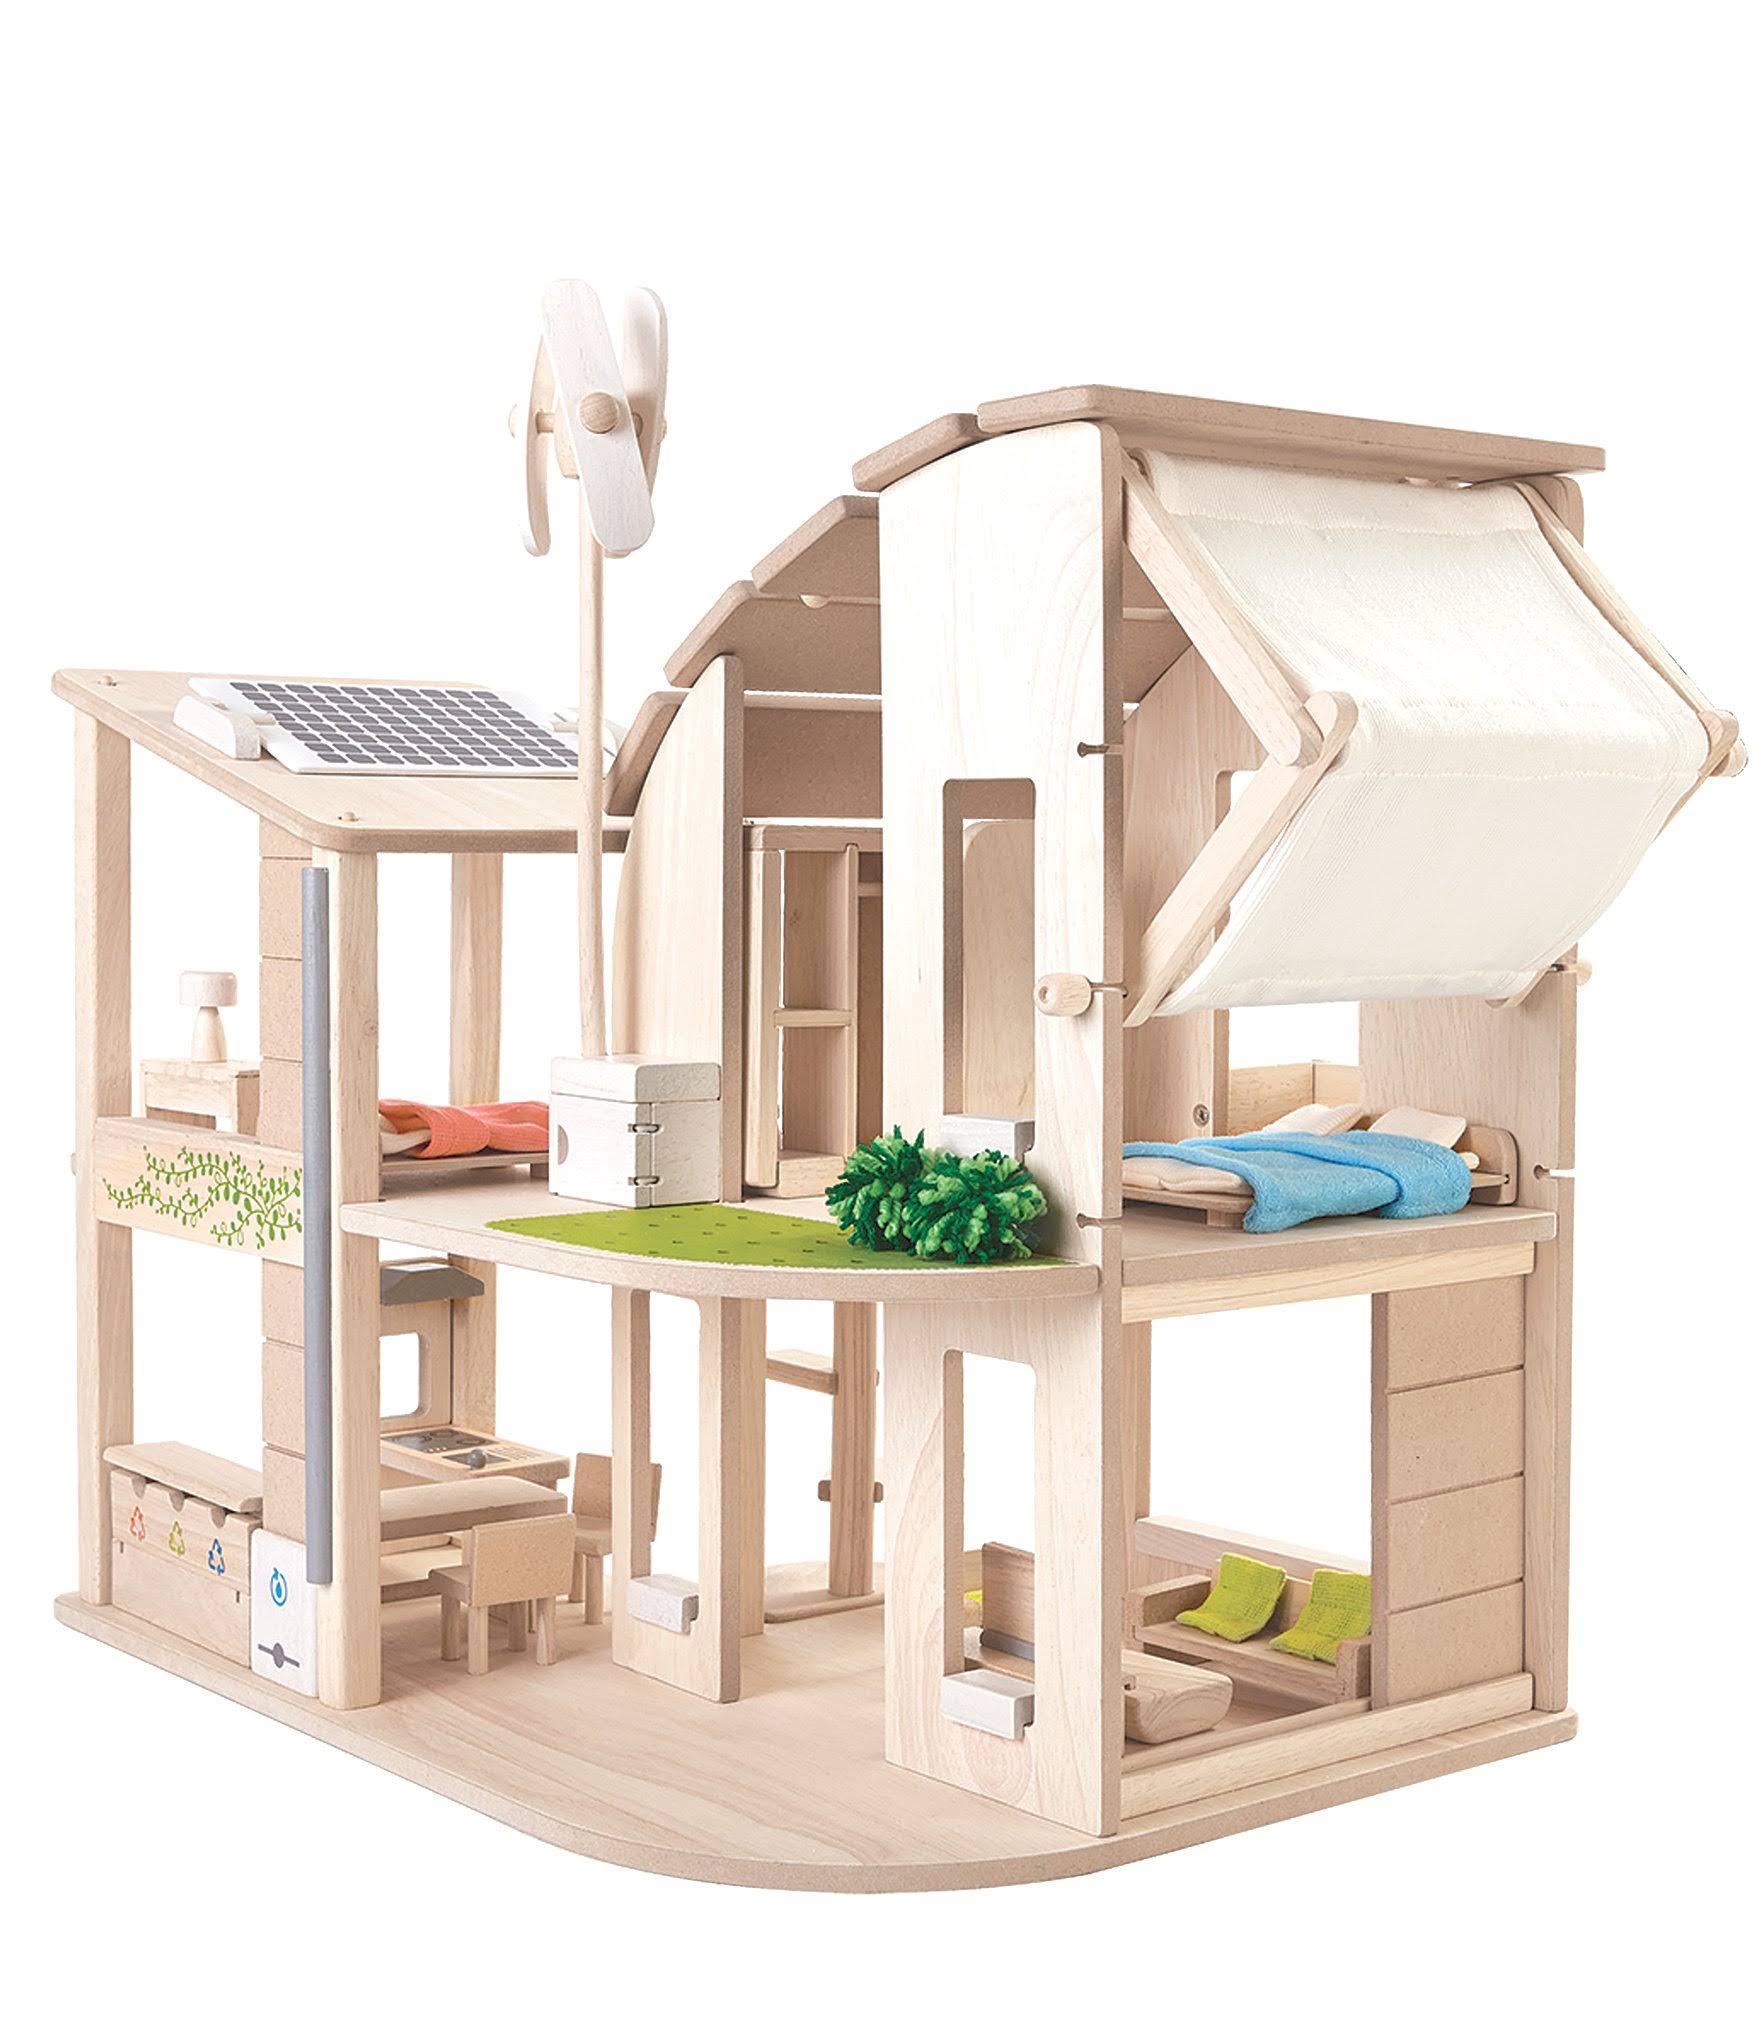 Plan Toys Dollhouse - with Furniture, Green